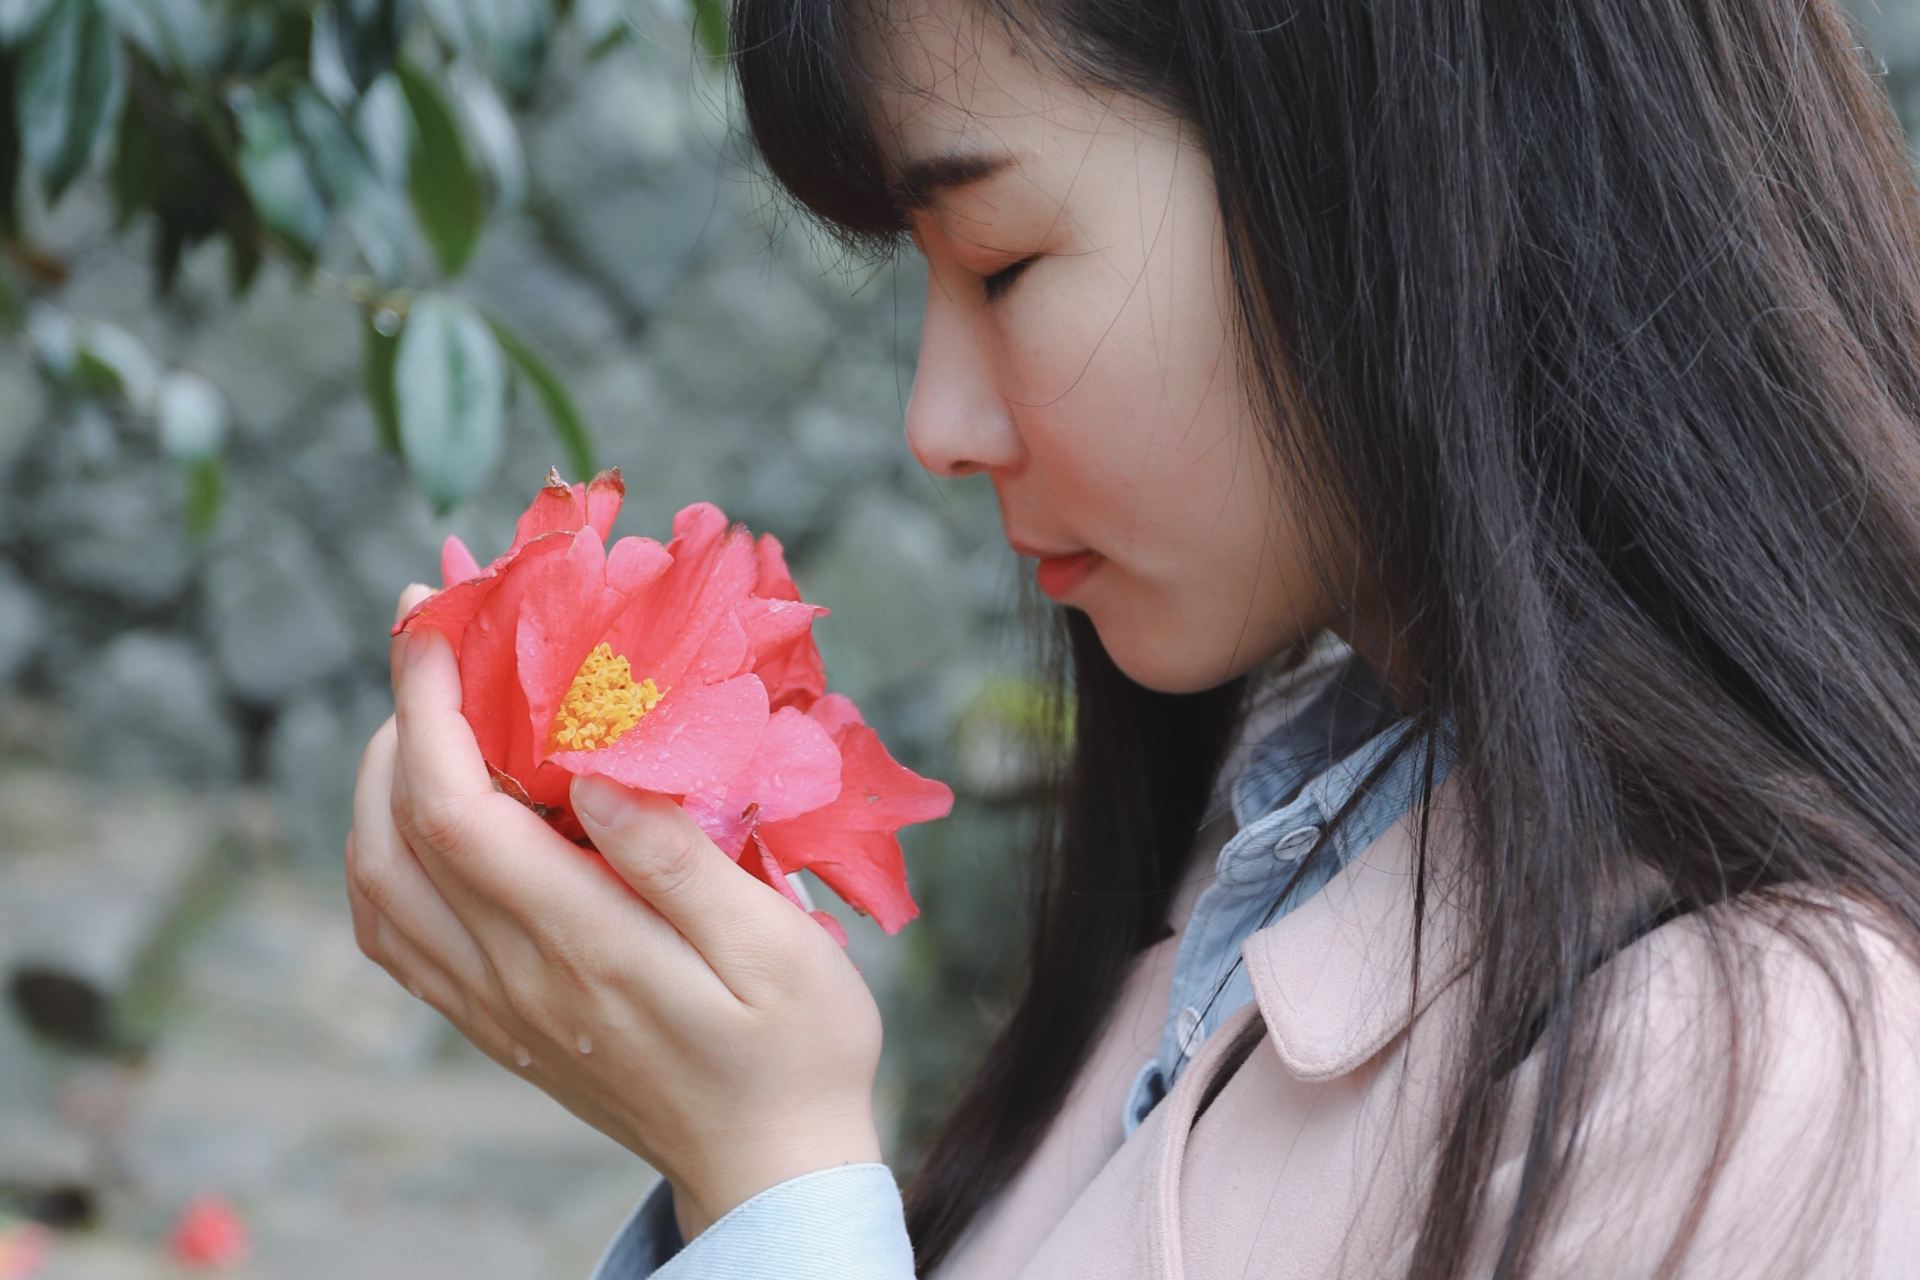 woman sniffing flower on her hands